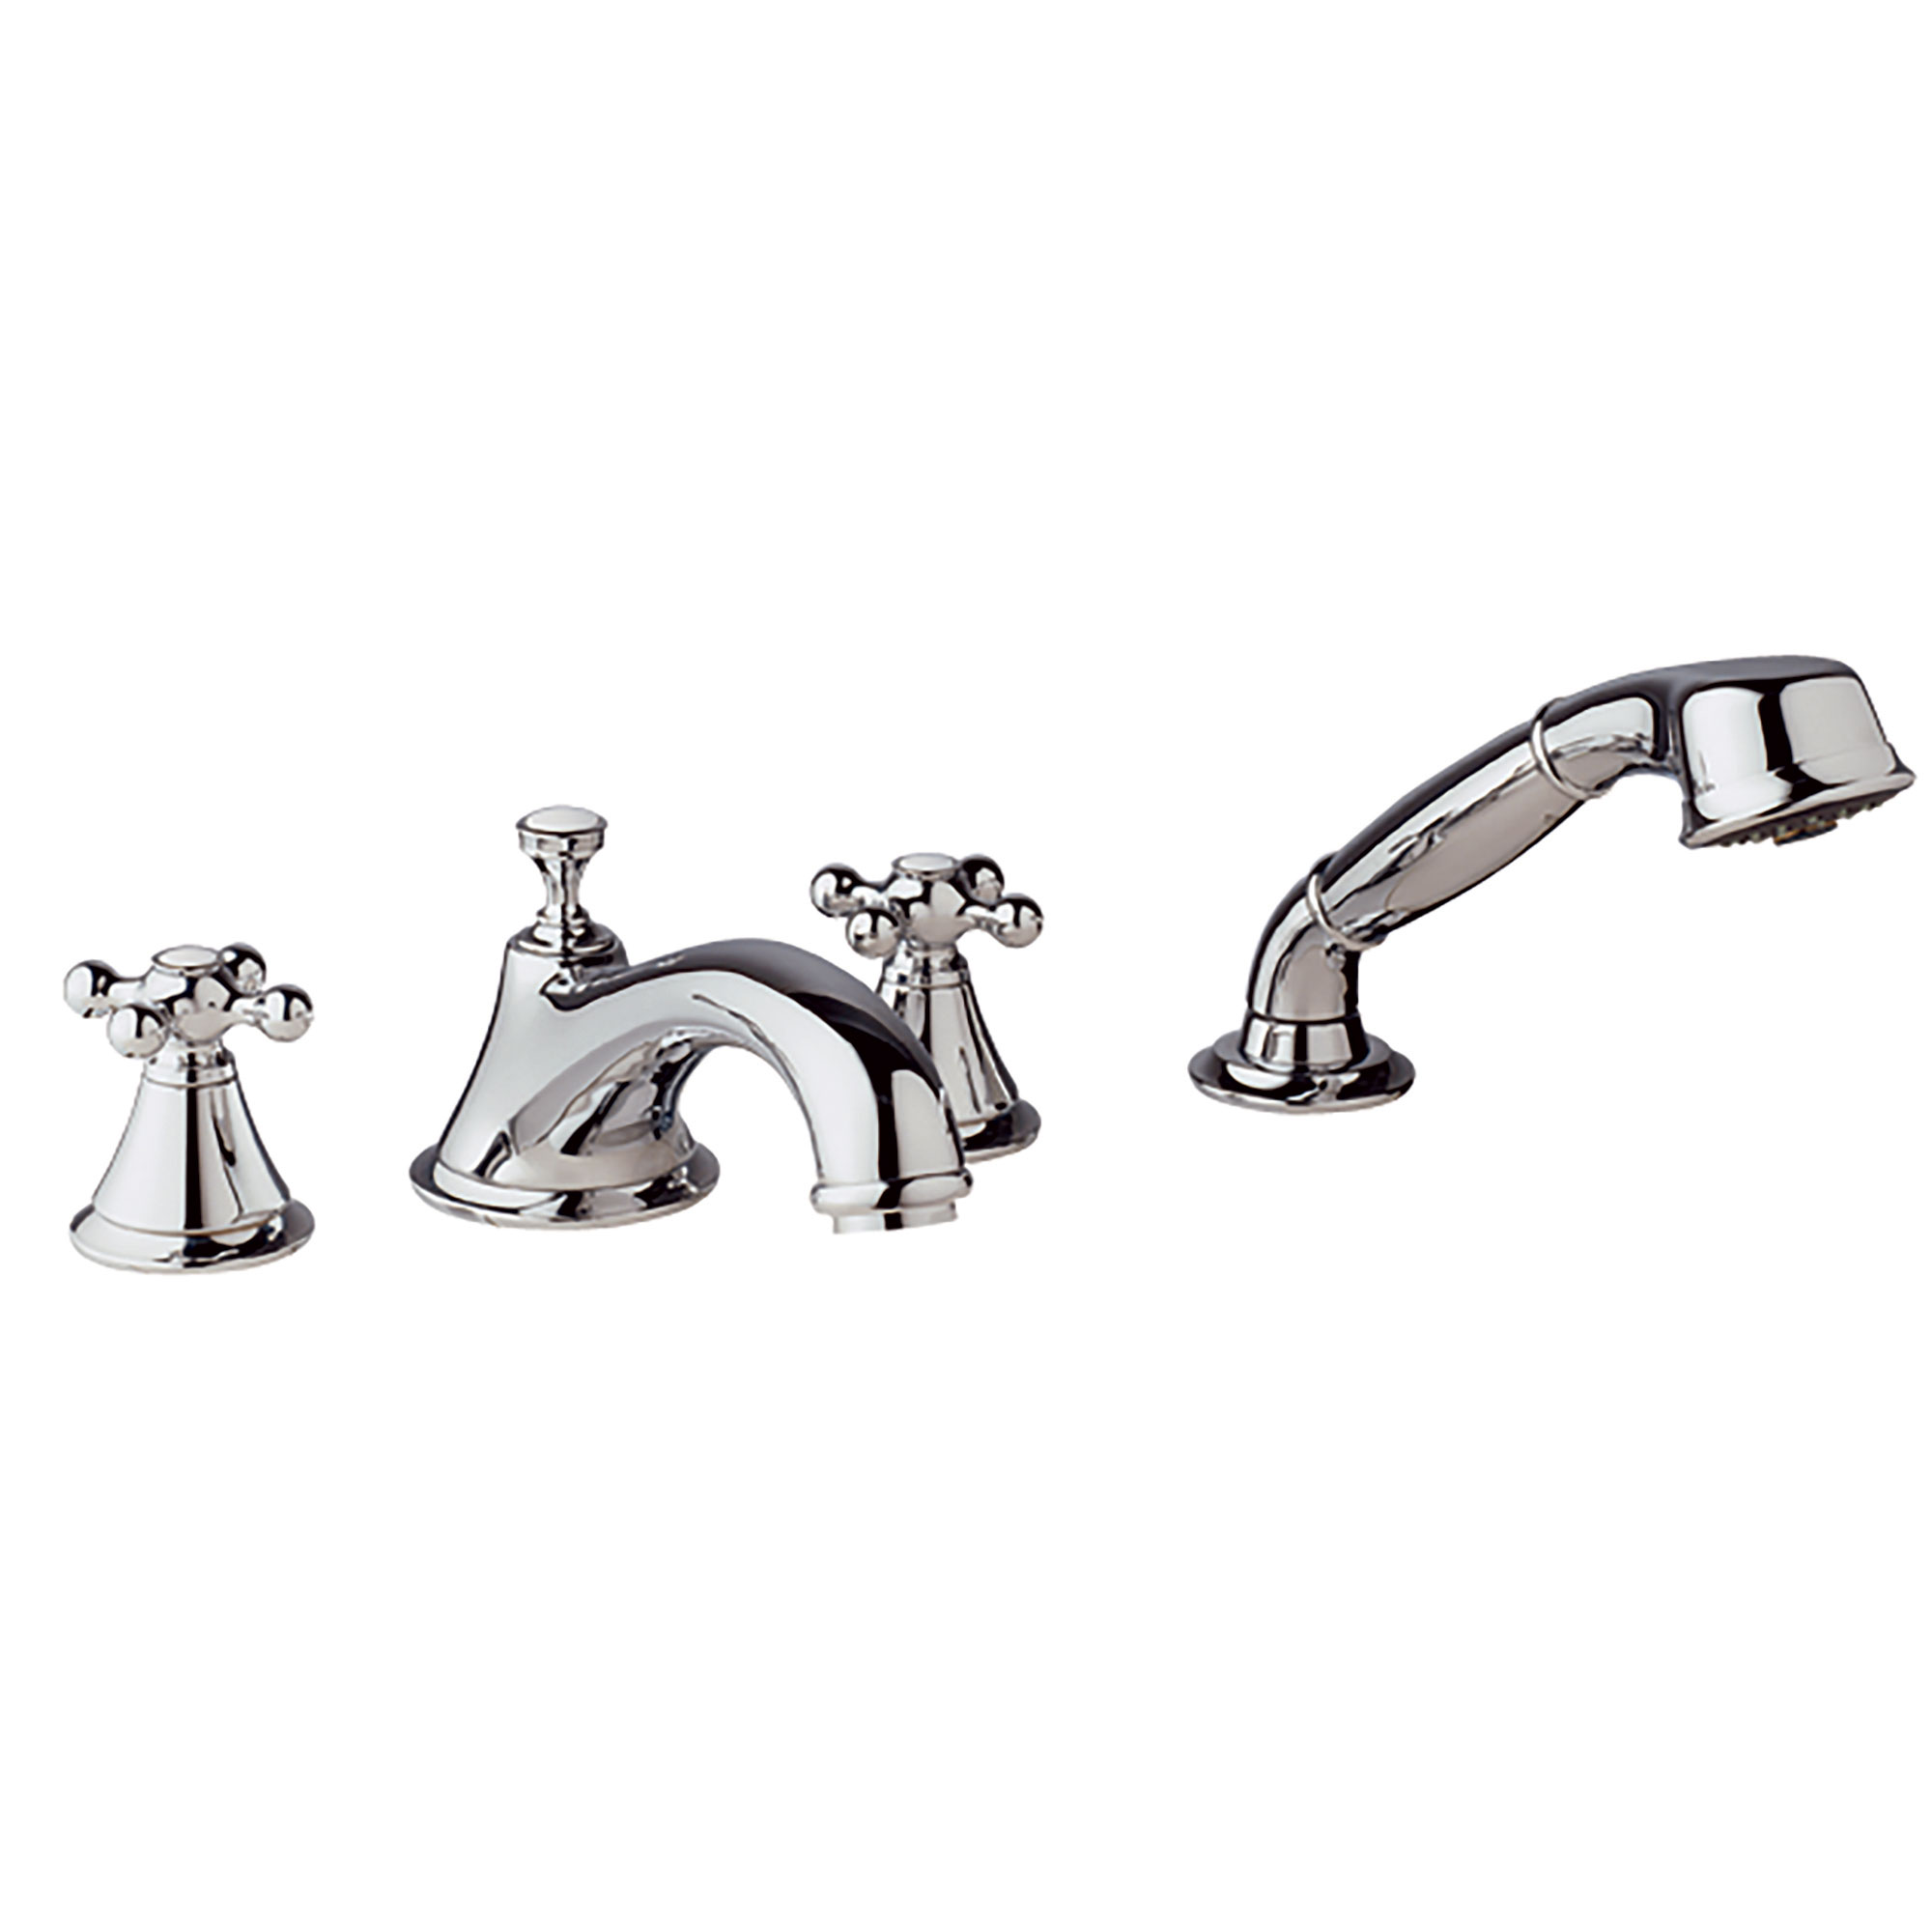 4-Hole 2-Handle Deck Mount Roman Tub Faucet with 9.5 L/min (2.5 gpm) Hand Shower